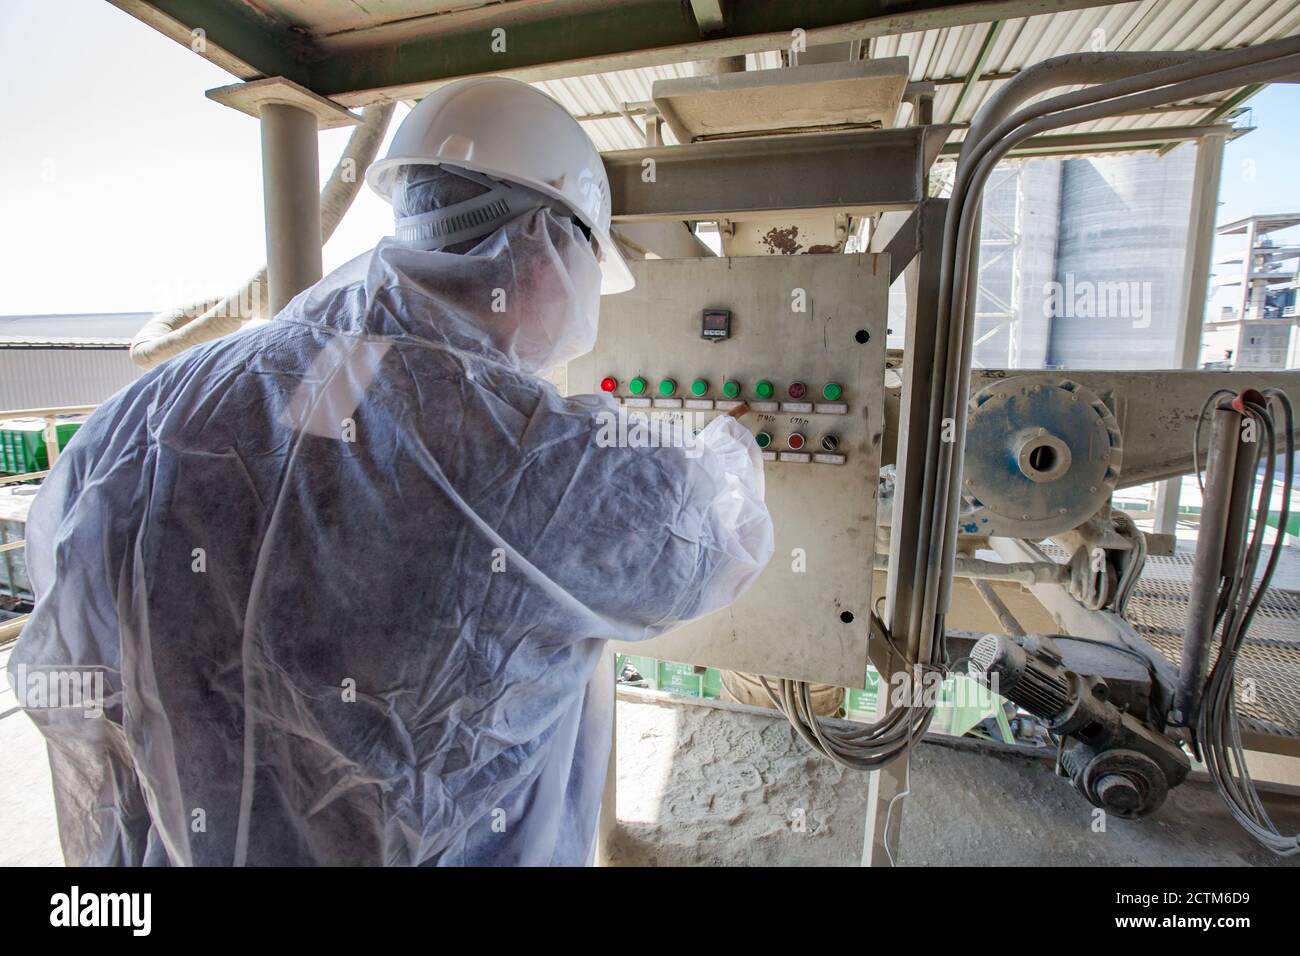 Mynaral/Kazakhstan - April 23 2012: Jambyl Cement plant. Engineer or worker in protective suit and white hard hat making an operation. Stock Photo